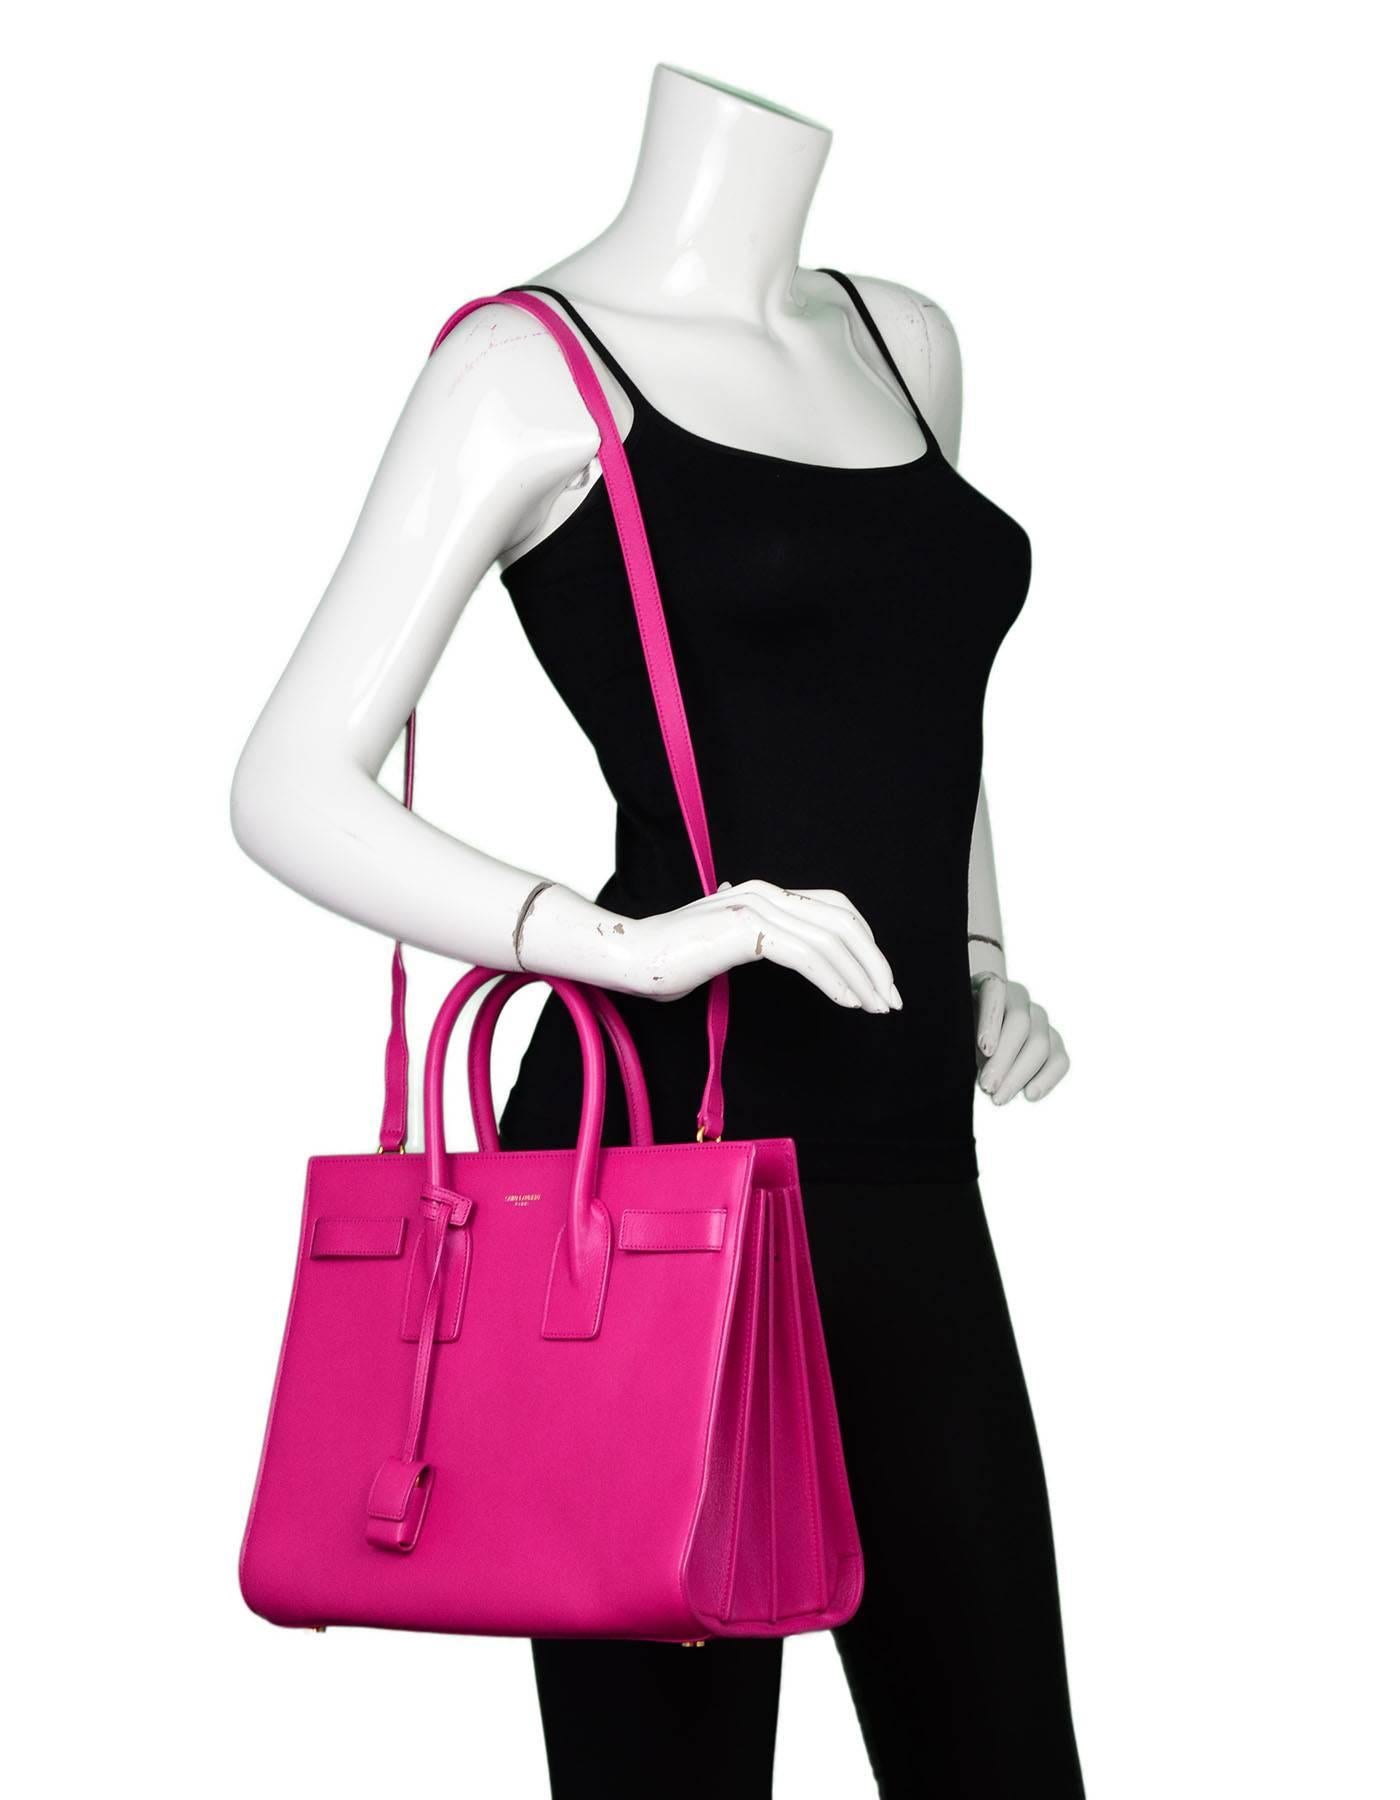 Saint Laurent Pink Small Sac De Jour Tote

Made In: Italy
Color: Pink
Hardware: Goldtone 
Materials: Leather and metal
Lining: Pink suede
Closure/Opening: Open top
Exterior Pockets: None
Interior Pockets: One center zip pouch, one zip wall